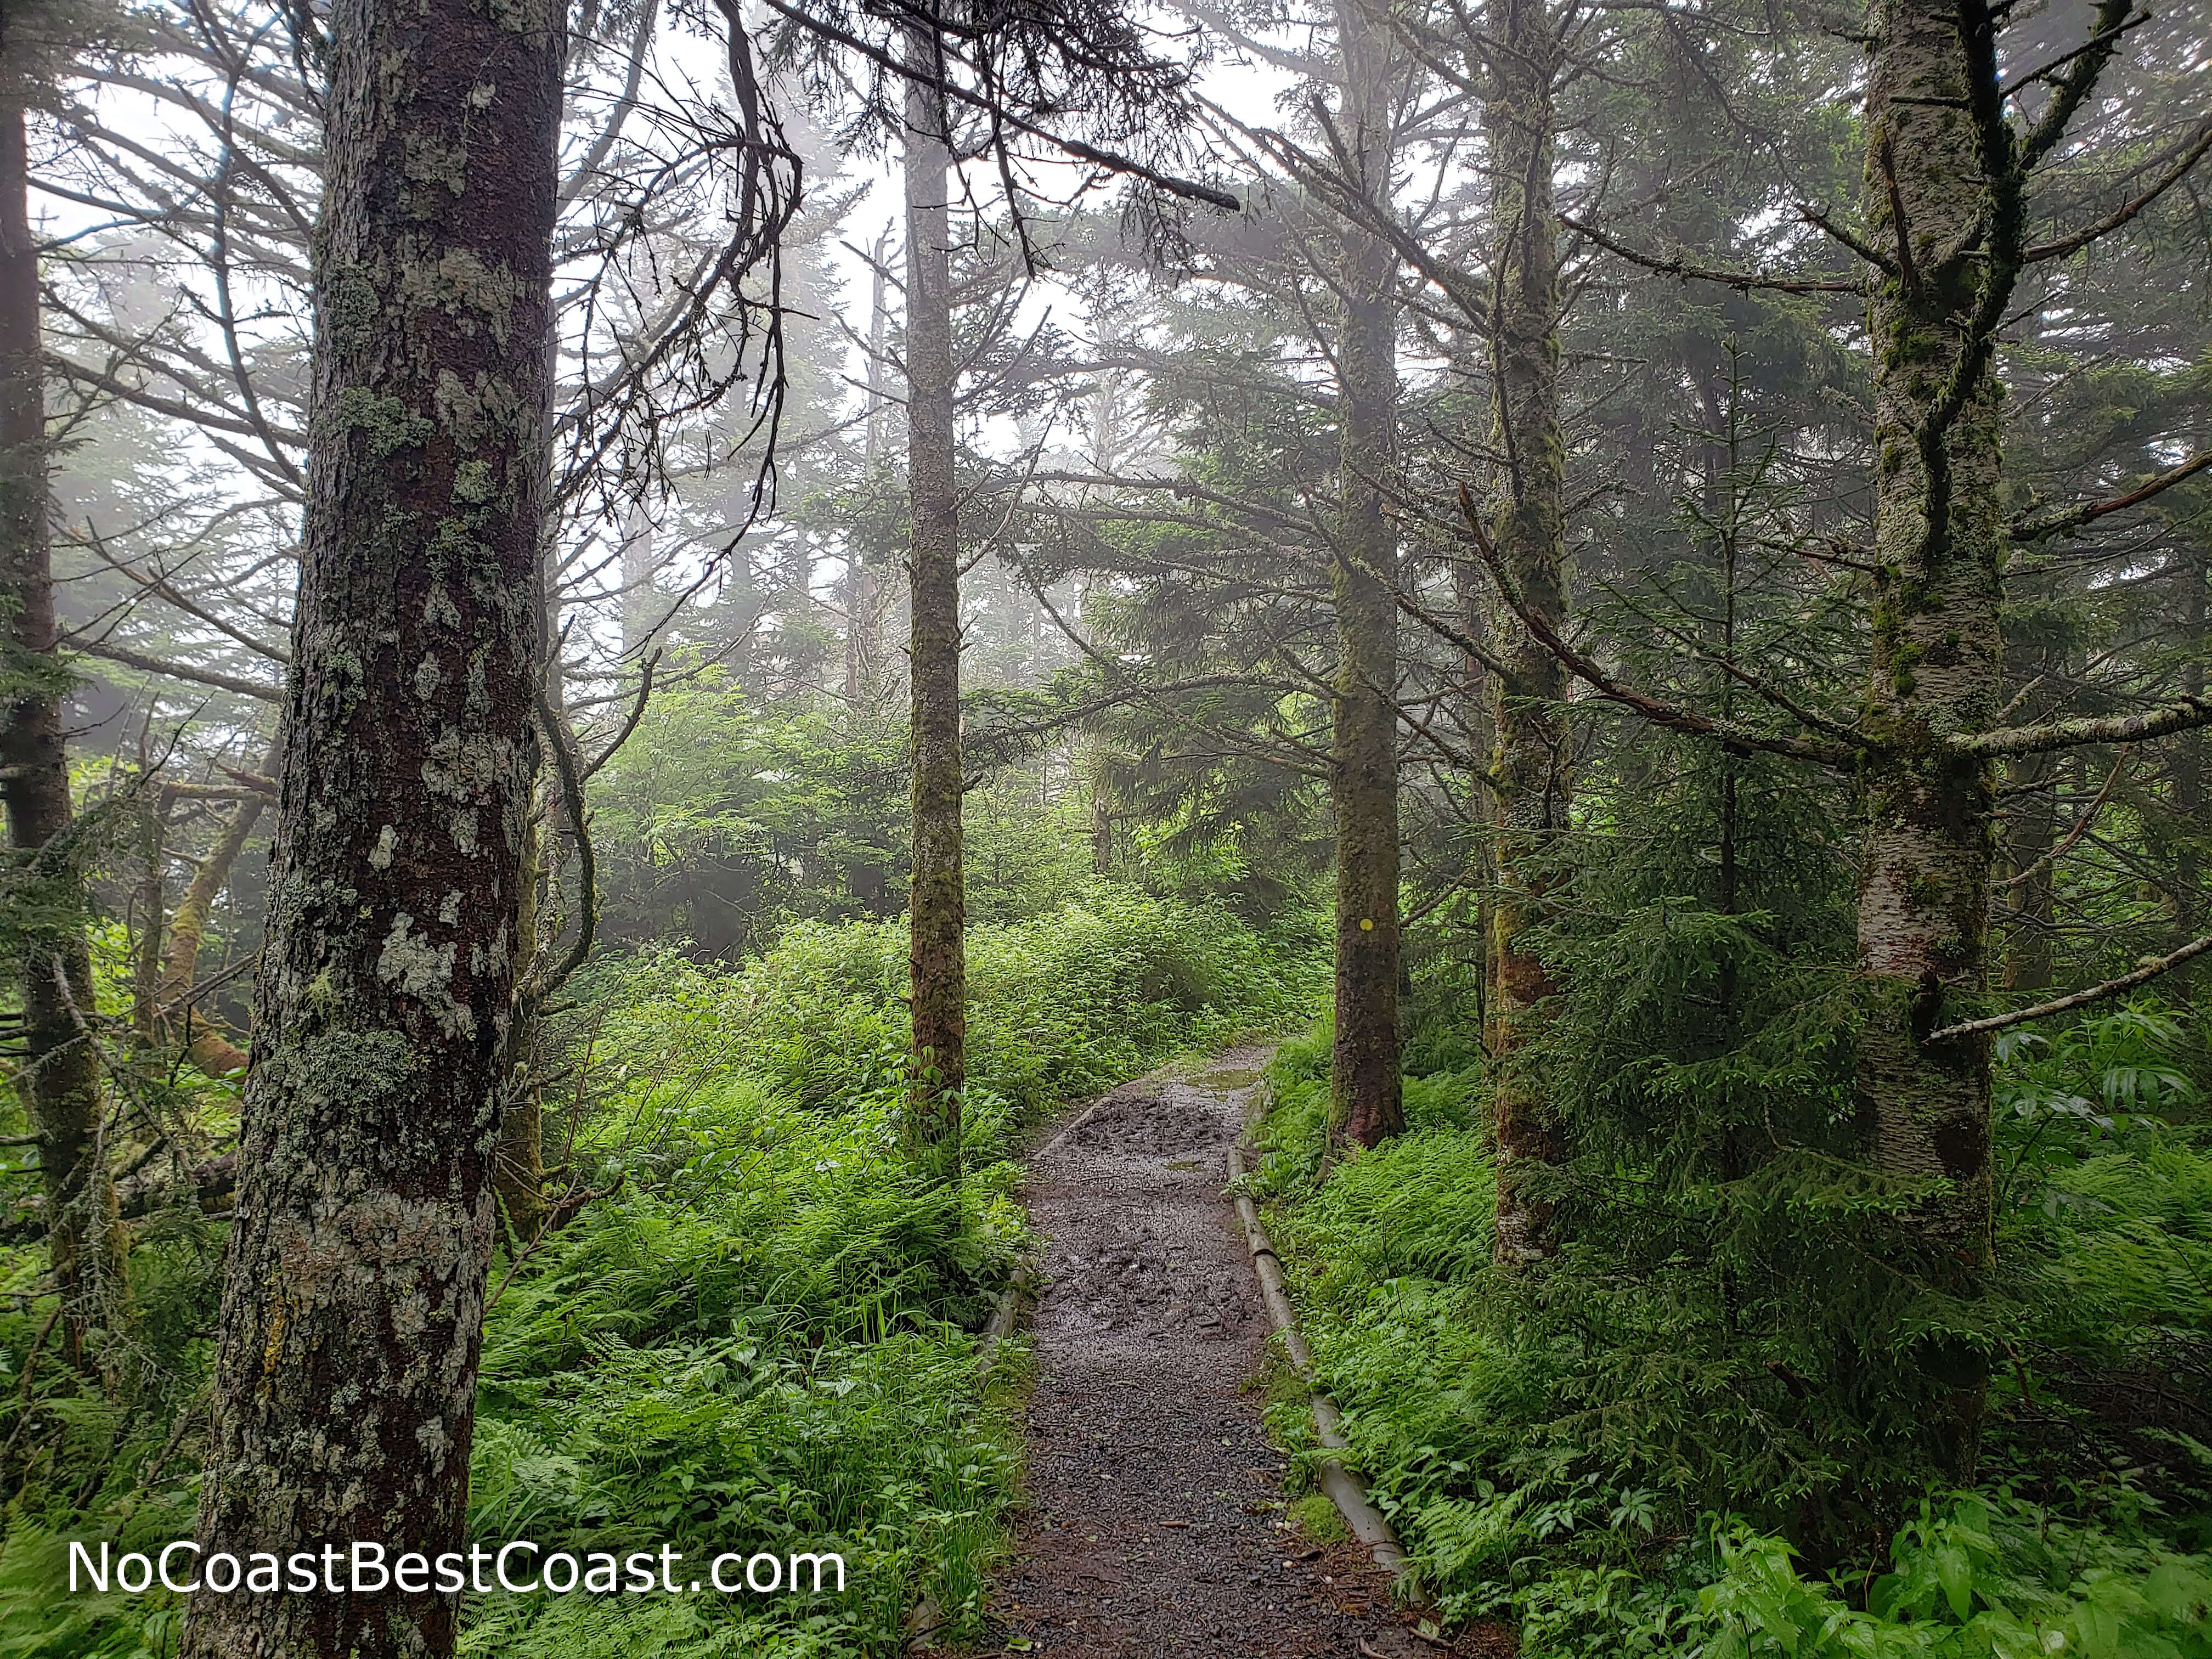 Foggy spruce-fir forest on the slopes of Mount Mitchell